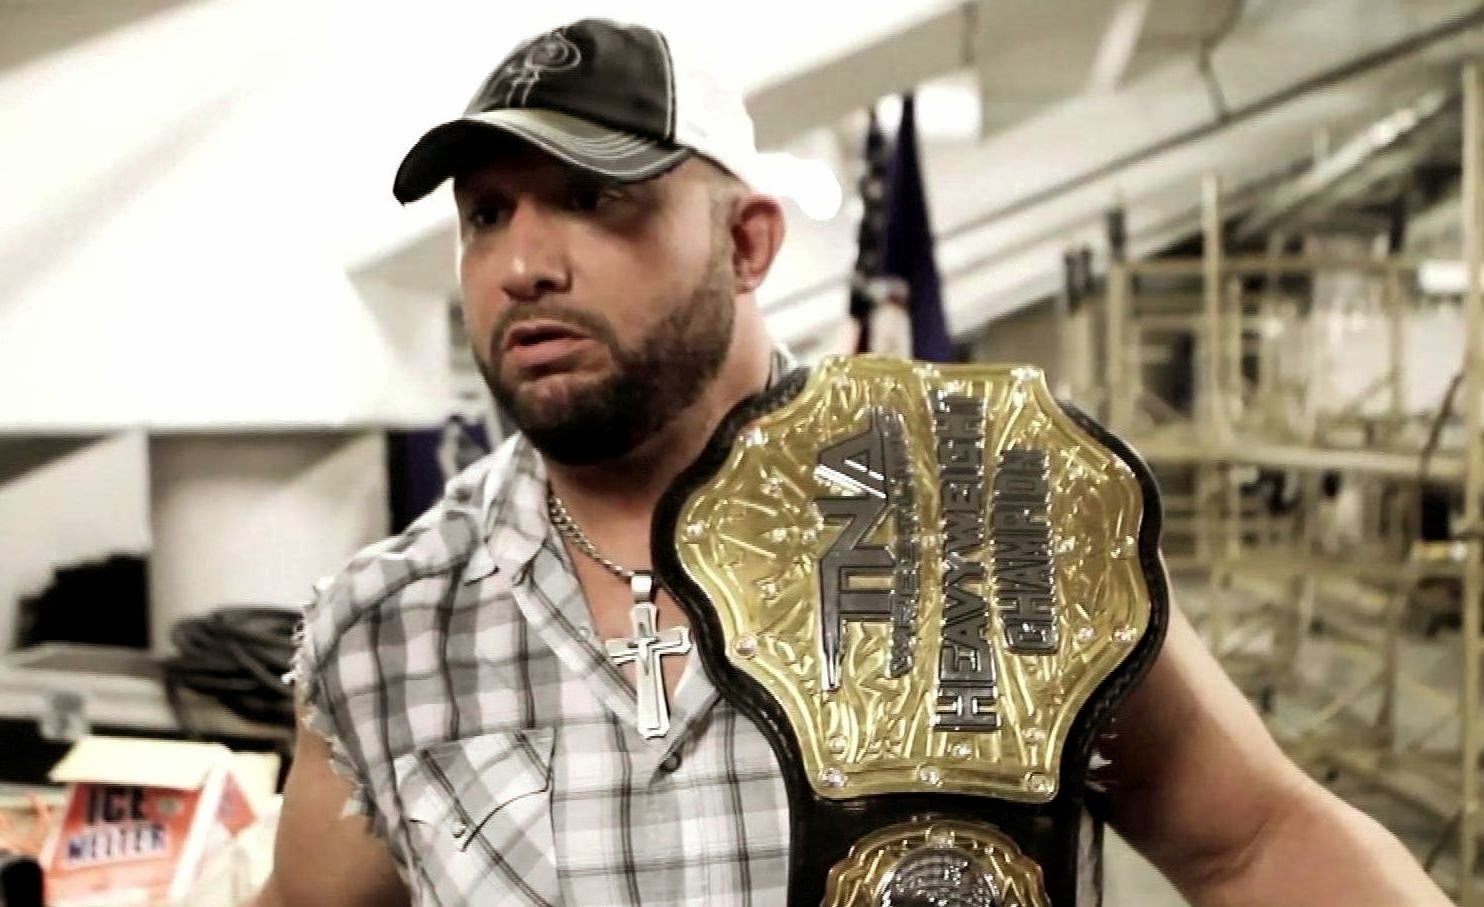 Bully Ray Hd Wallpapers Free Download